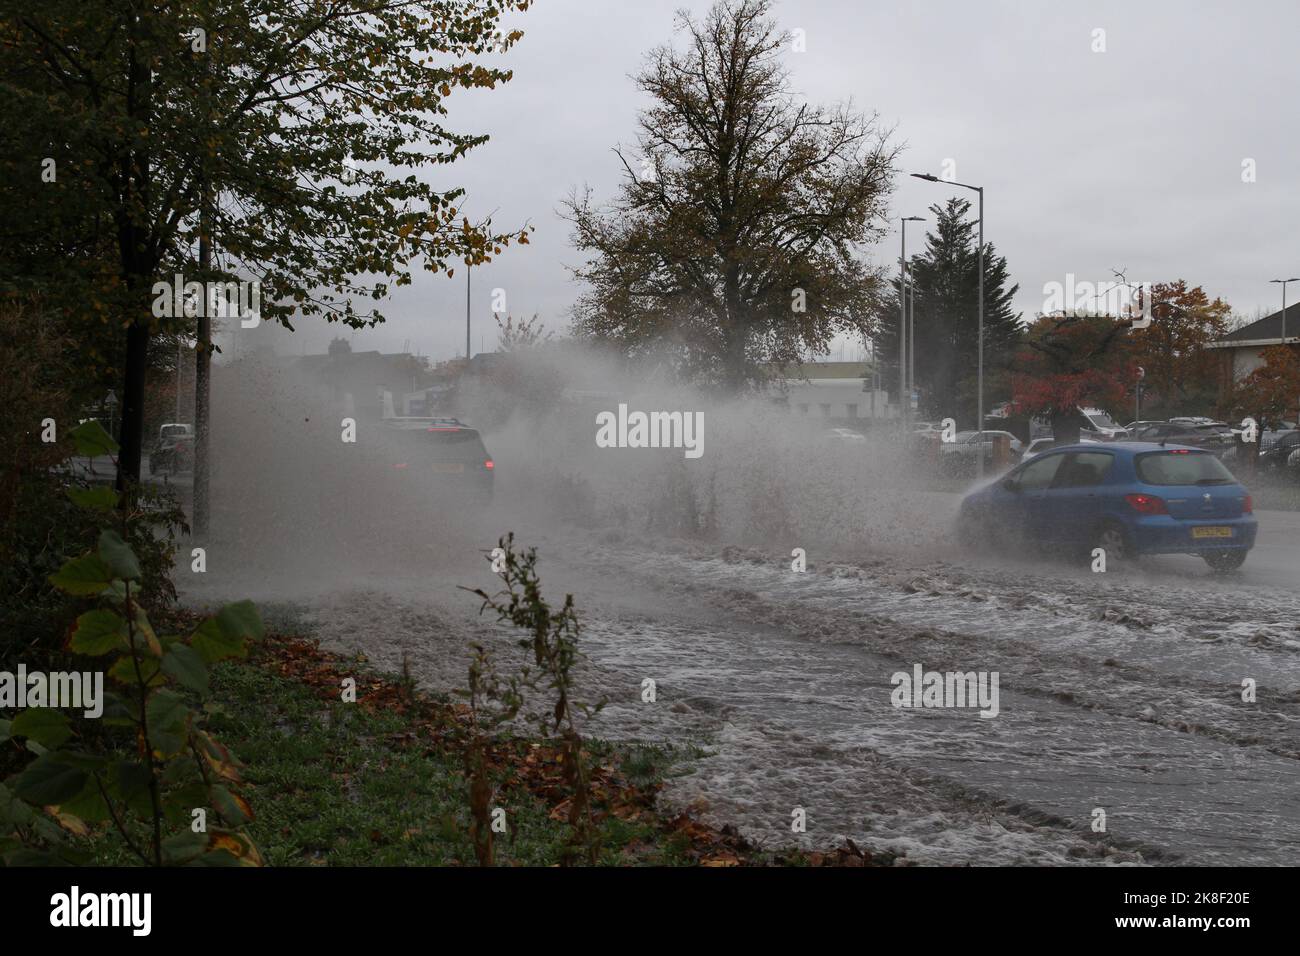 Colchester, UK. 23rd Oct 2022. Heavy thundery showers are causing flash flooding on some roads in Colchester, Essex. There is a Met Office weather warning in place for thunderstorms across the east of England until the early hours of Monday morning. Credit: Eastern Views/Alamy Live News Stock Photo